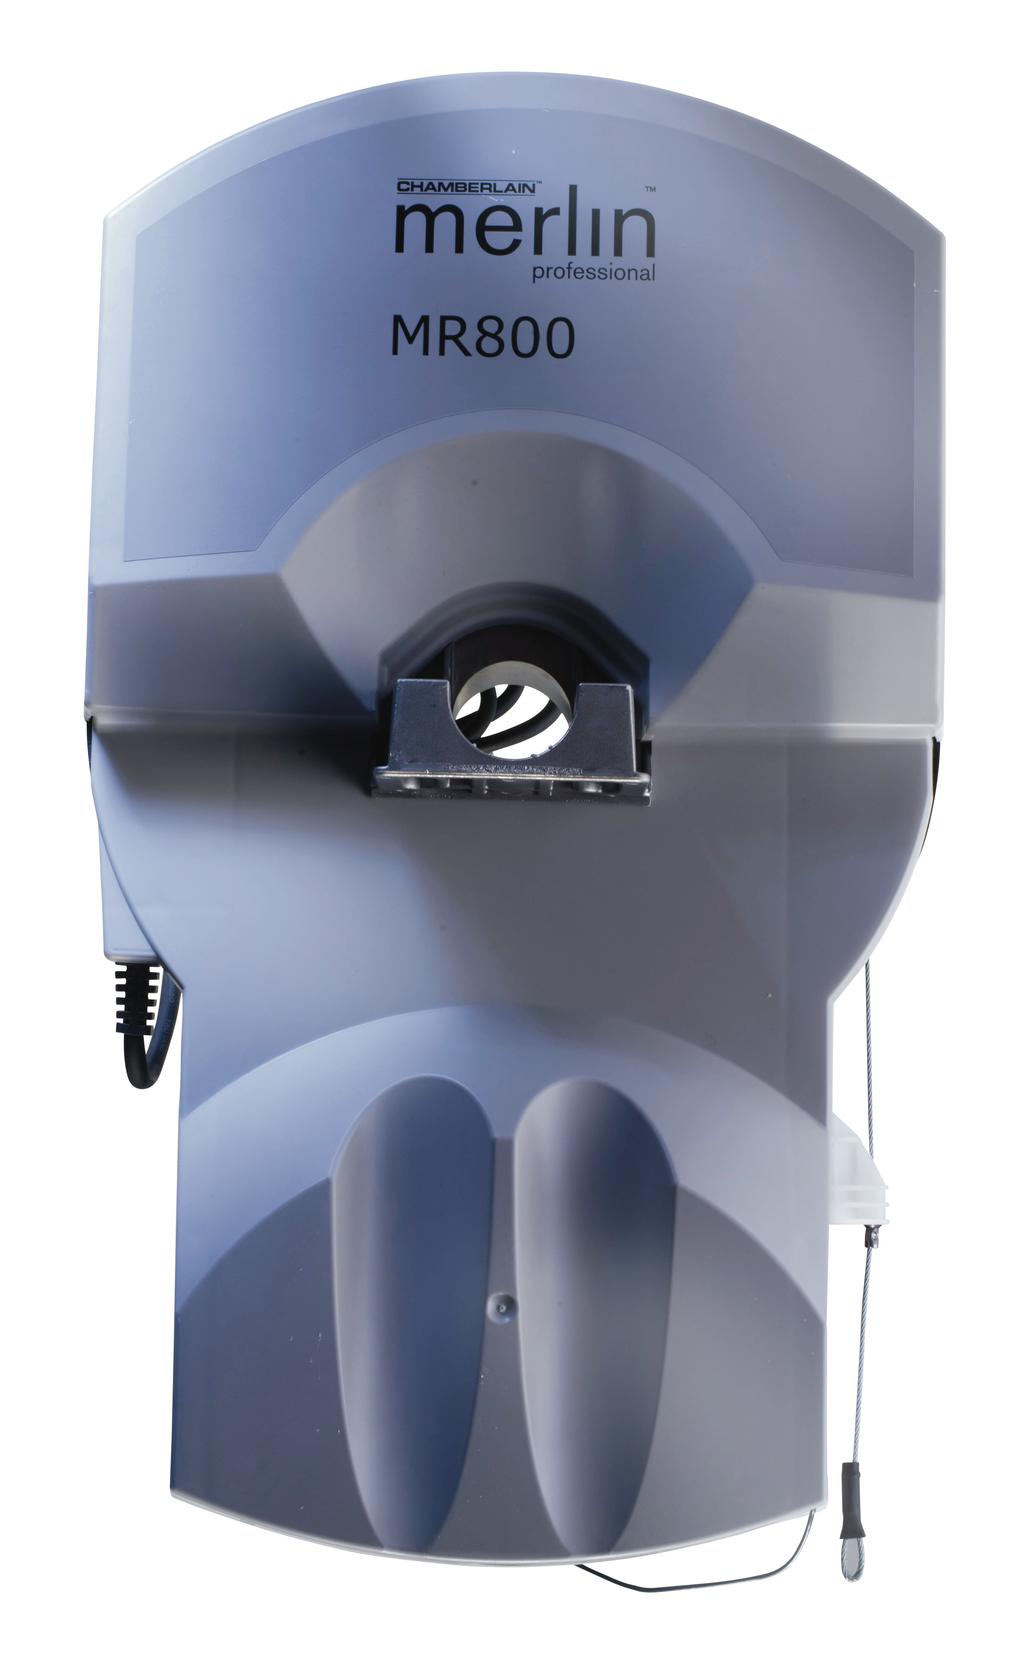 Merlin Professional MR800 Powerful slimline roller door opener for single and heavy double door garages Key Features Soft Start/Stop operation Auto safety function Auto force sensing Two 3 channel